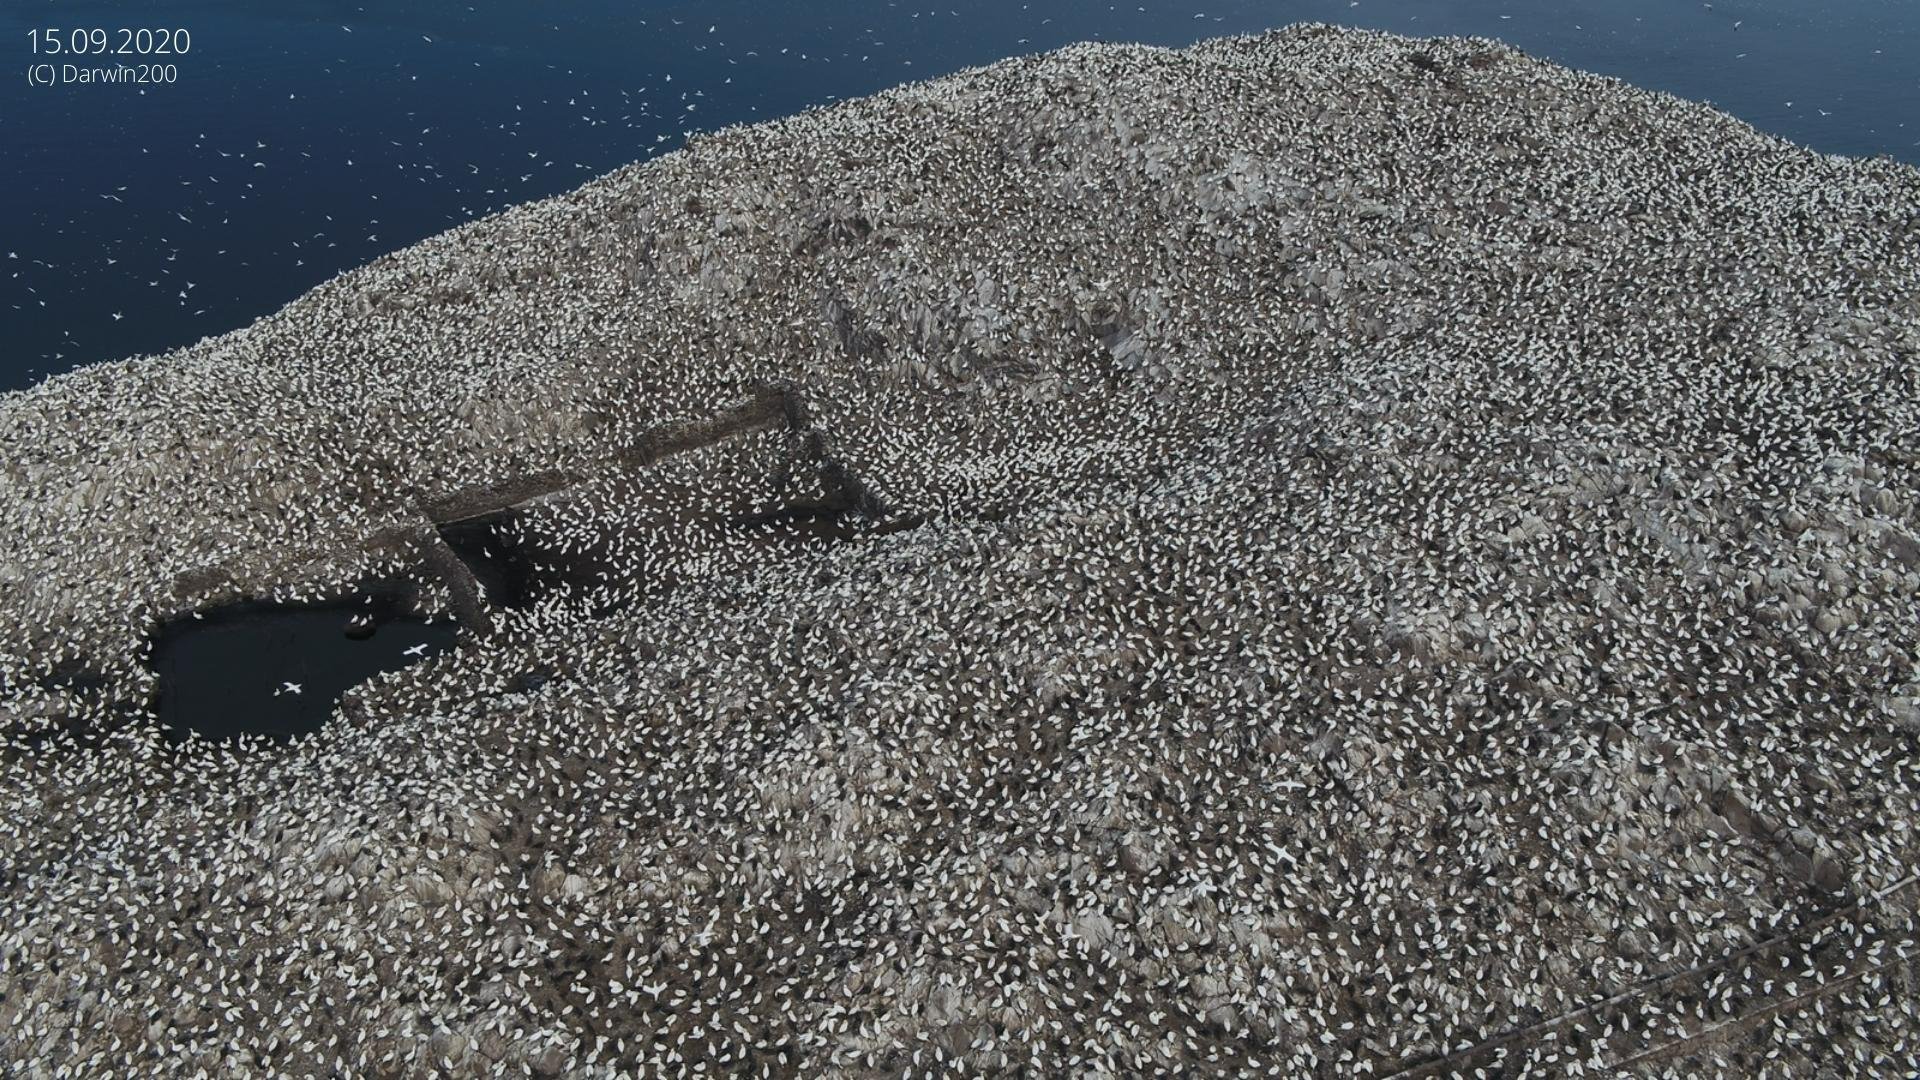 The landmark is home to hundreds of thousands of gannets in peak season, as seen in this image from 2020. 